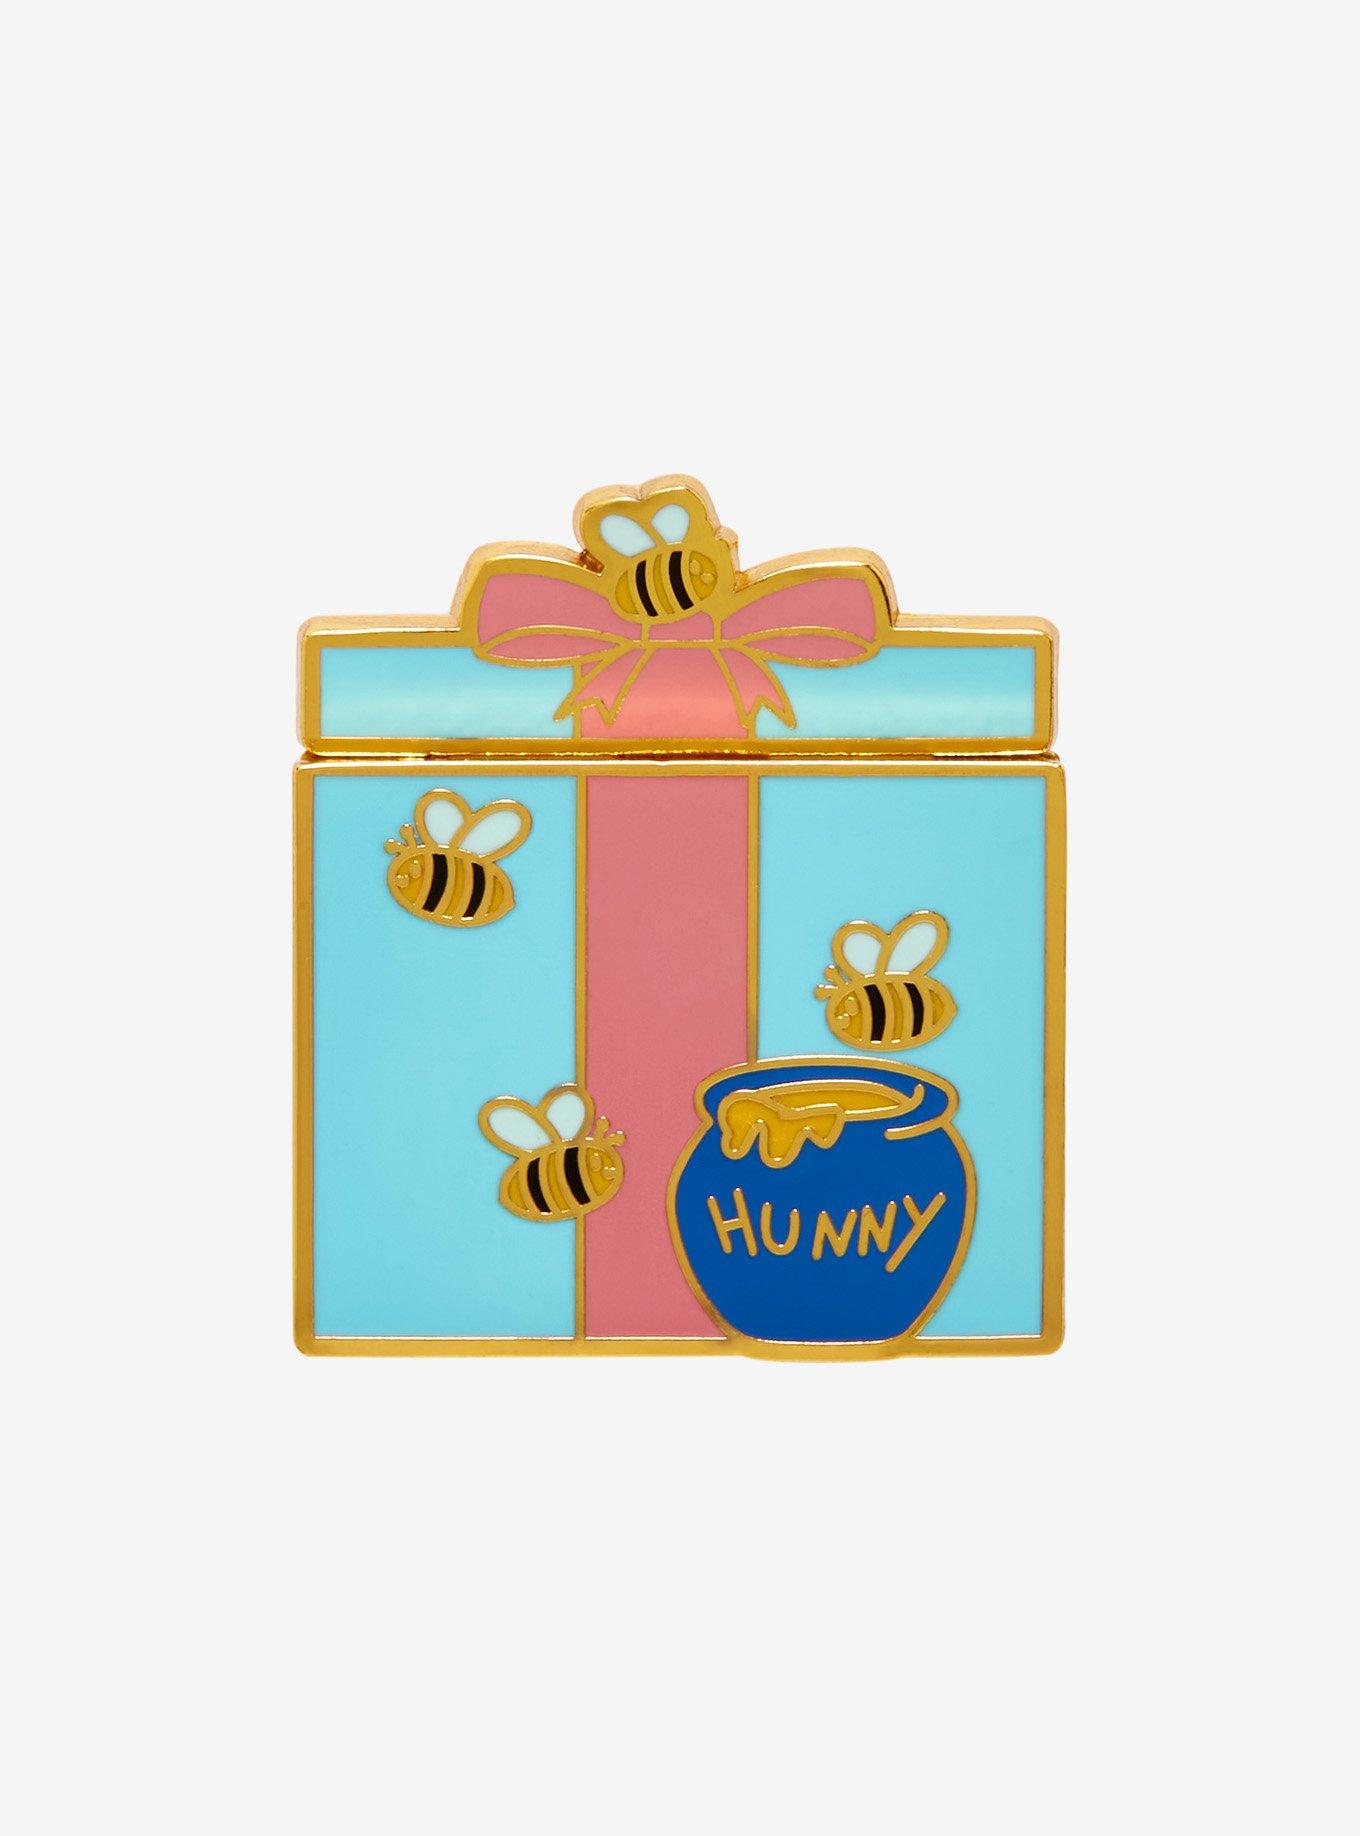 Loungefly Disney Winnie the Pooh Present Sliding Enamel Pin - BoxLunch Exclusive, , alternate